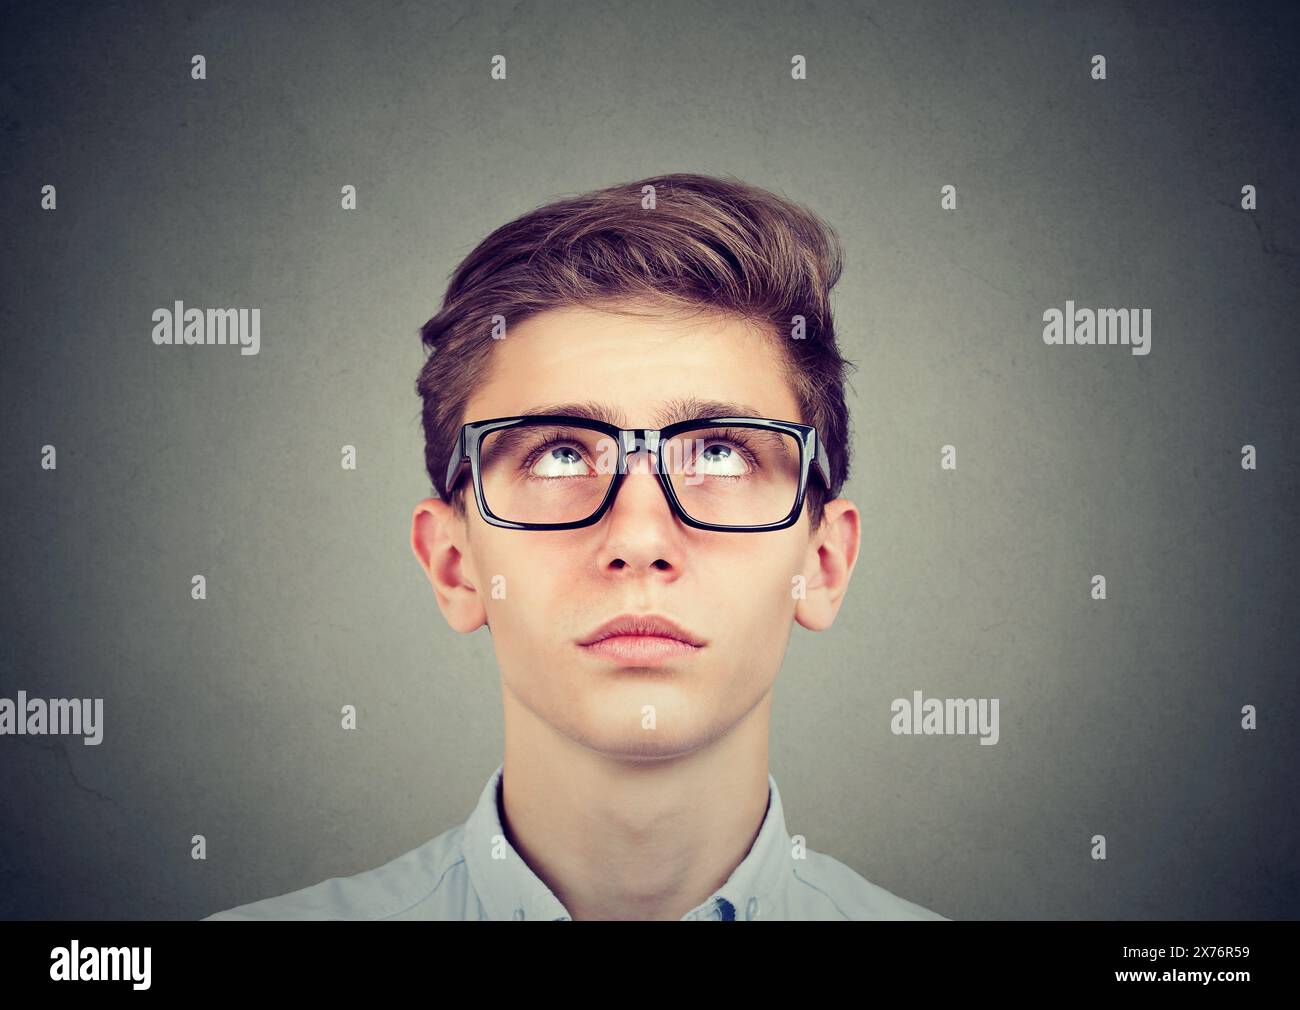 Portrait of a thinking young man looking up Stock Photo